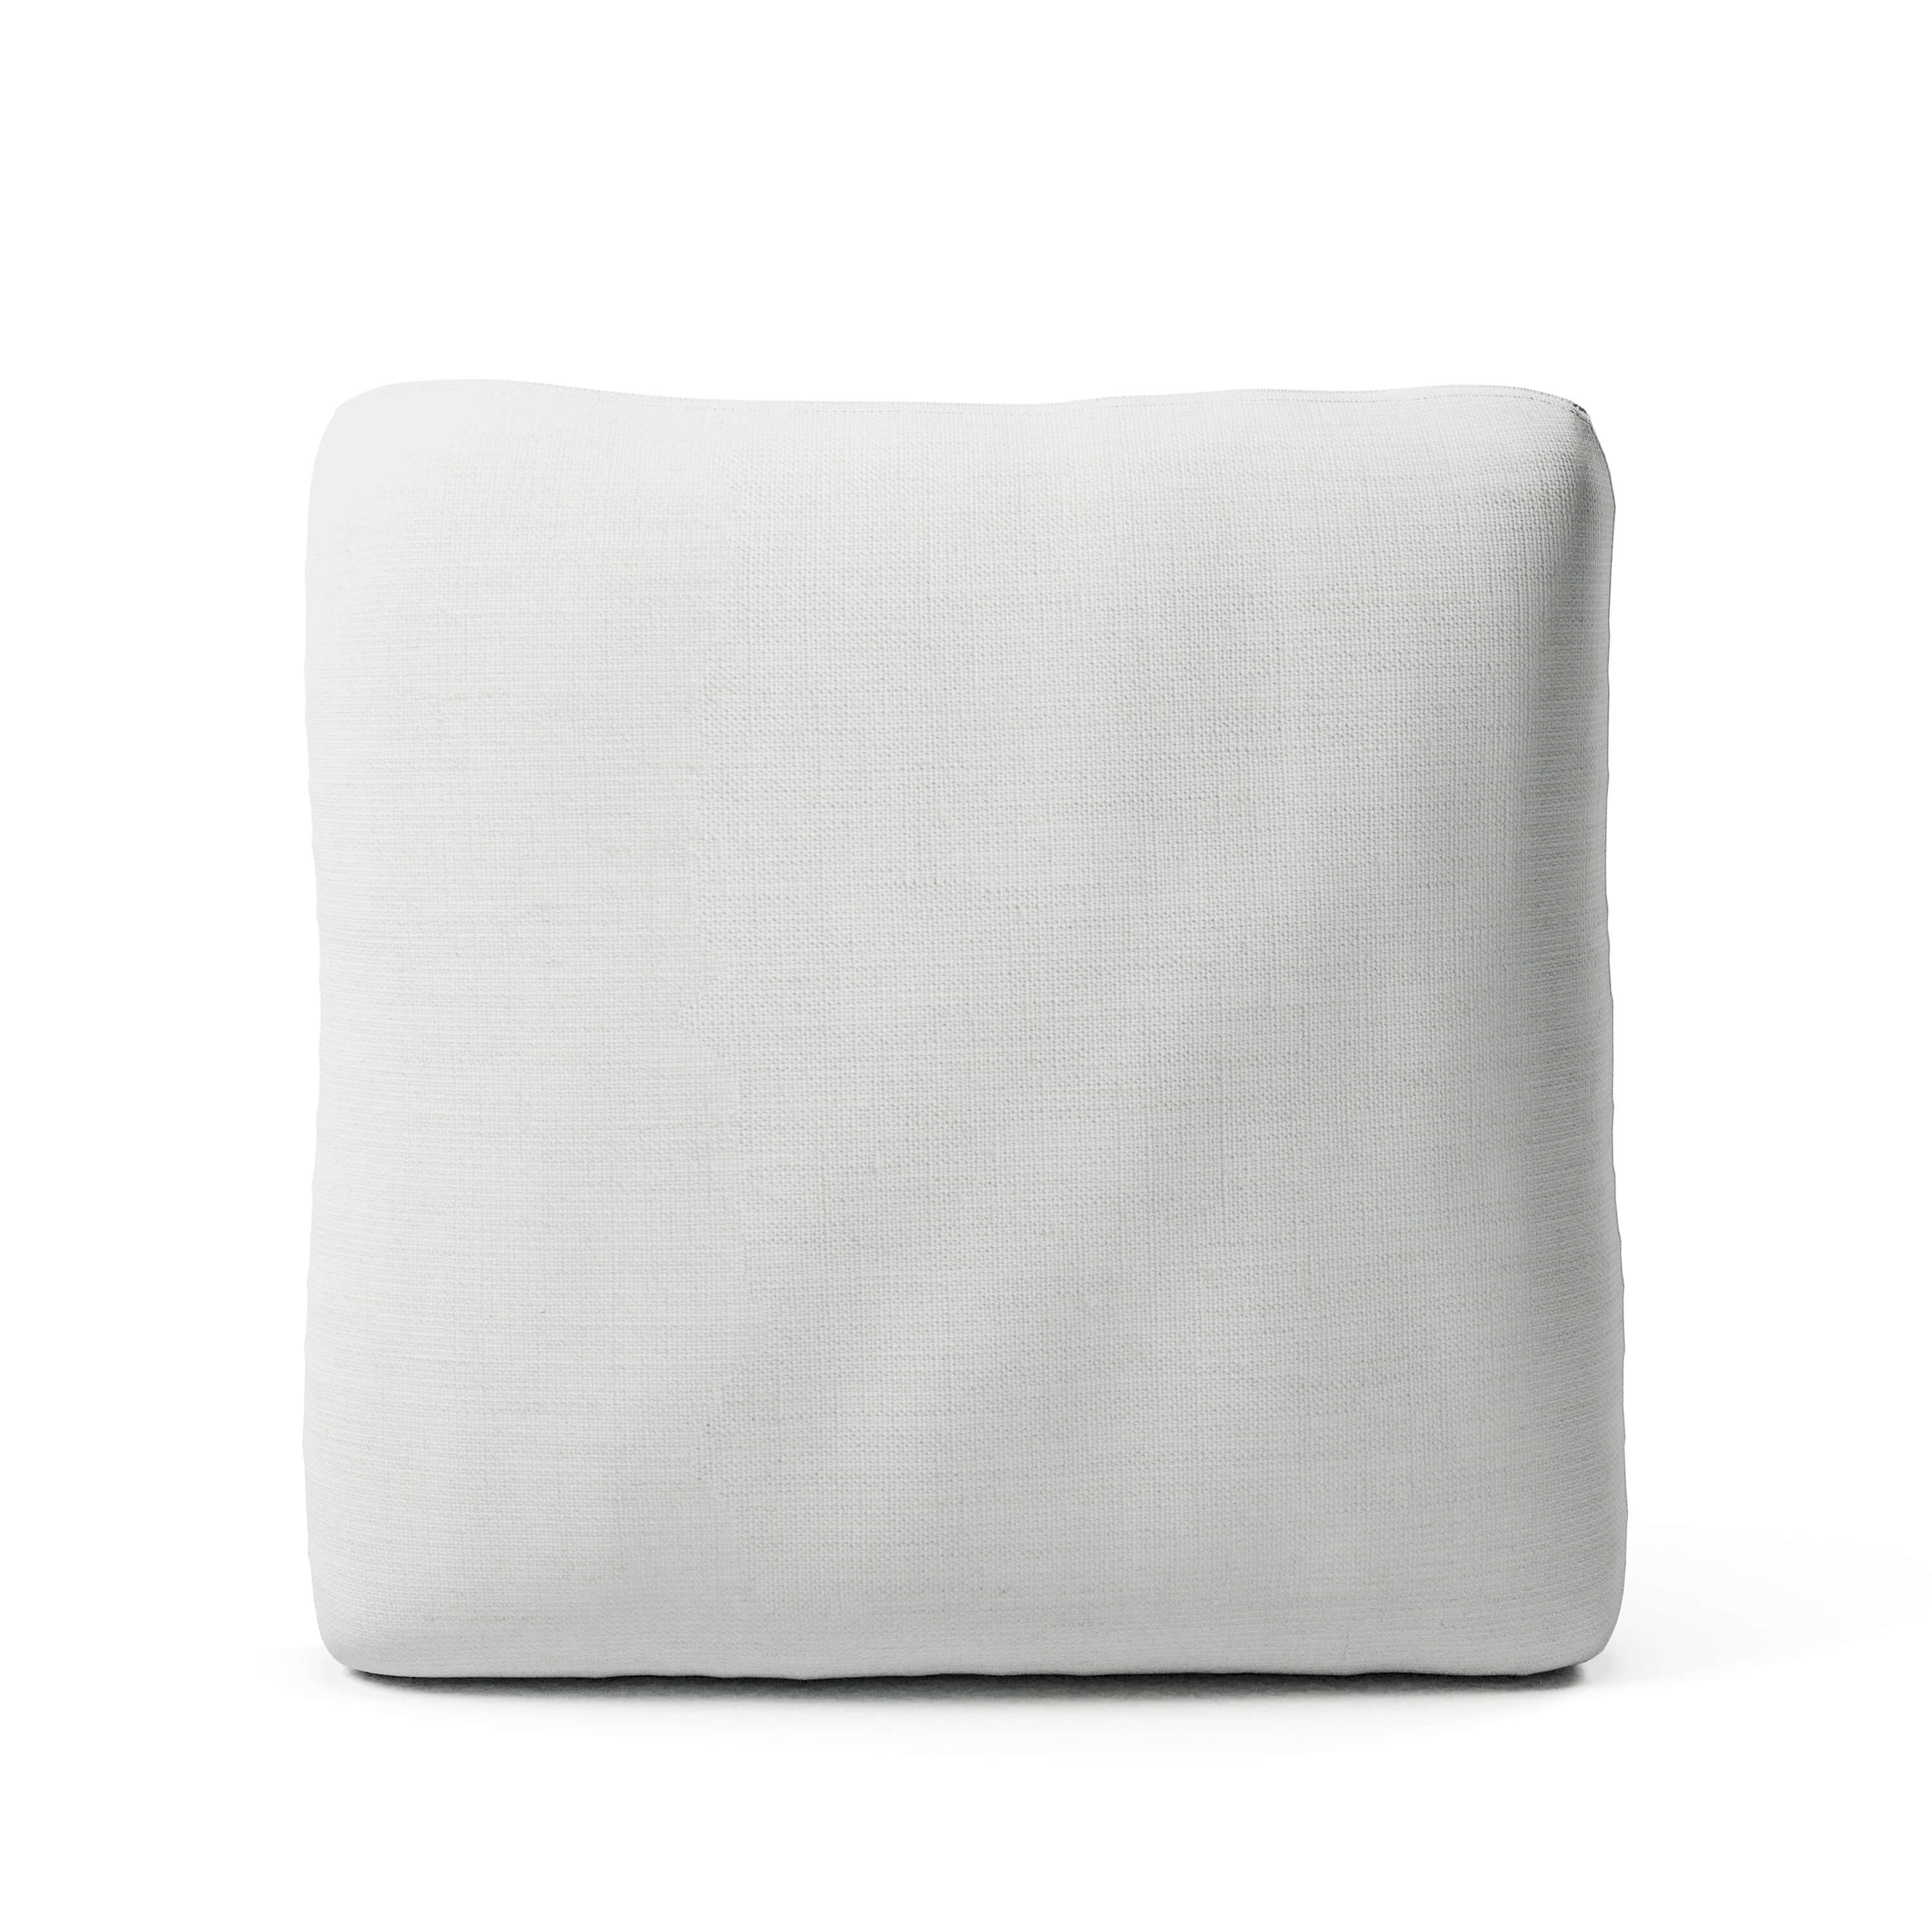 Comfy Sofa - Seat Cushion Slipcover Replacement